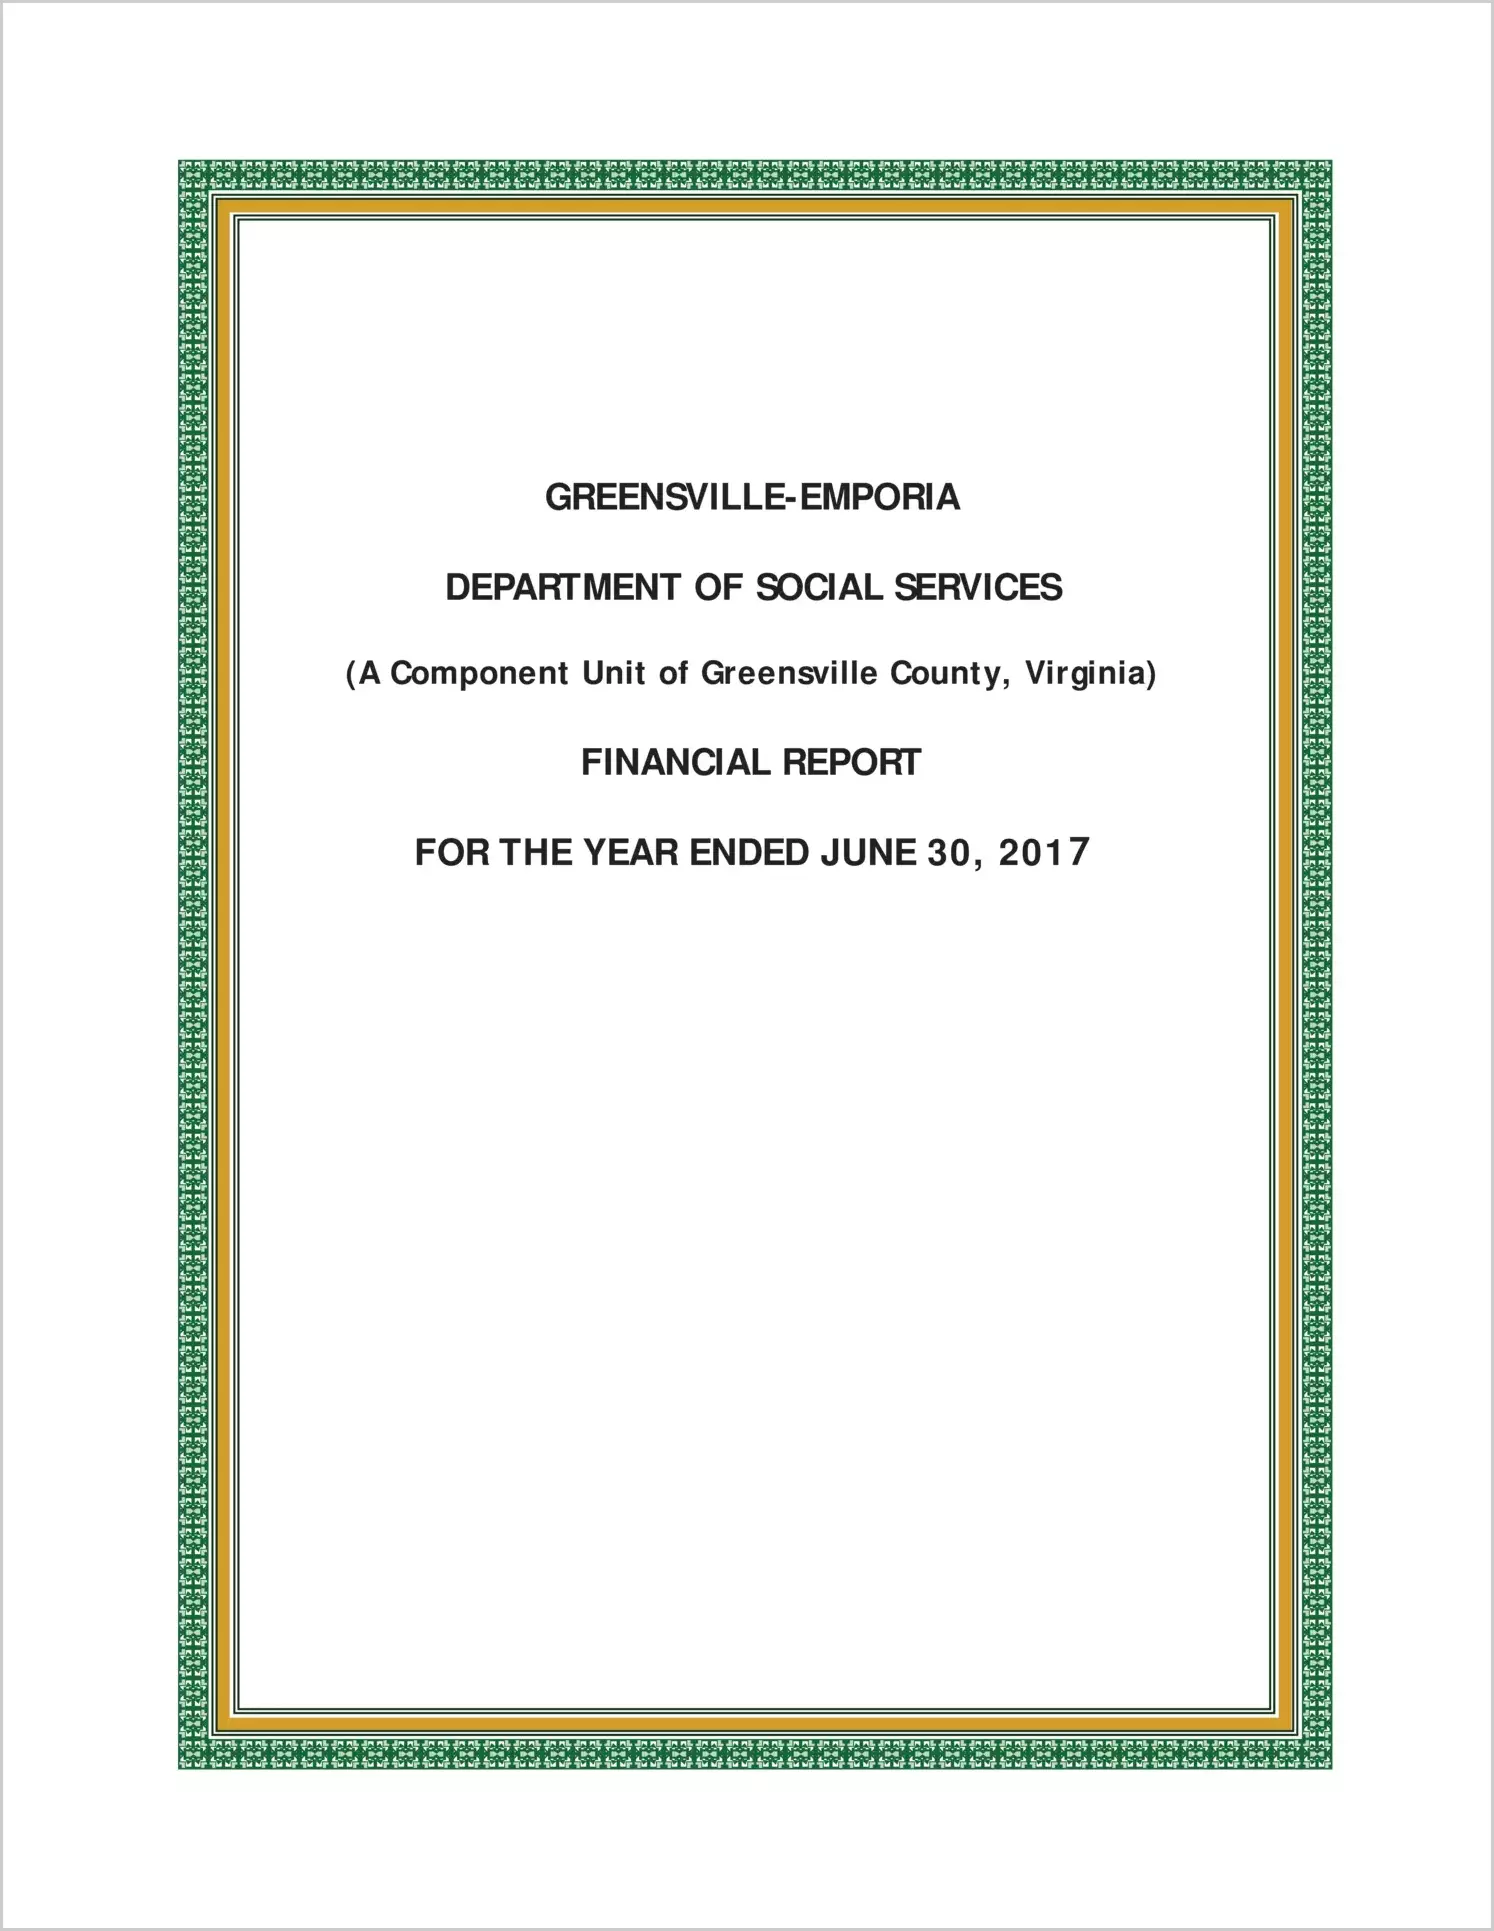 2017 ABC/Other Annual Financial Report  for Greensville-Emporia Department of Social Services